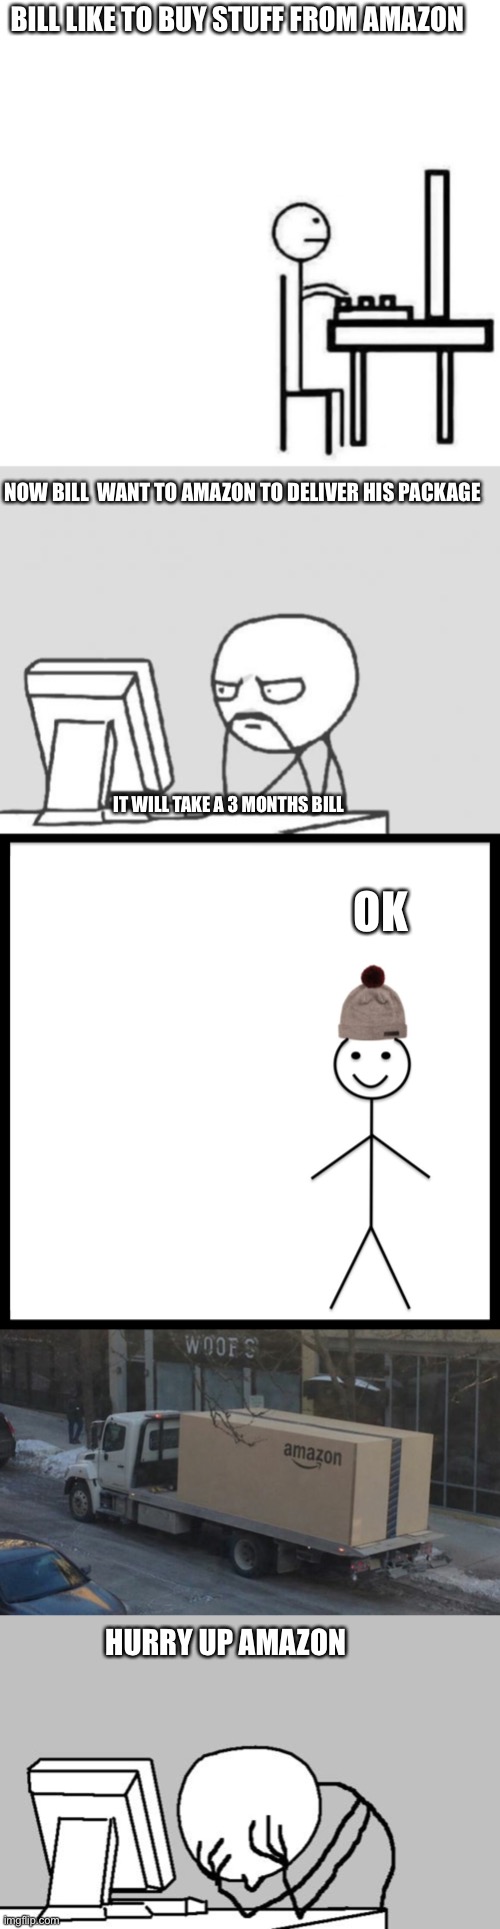 Amazon Shipping movie Part 1 | BILL LIKE TO BUY STUFF FROM AMAZON; NOW BILL  WANT TO AMAZON TO DELIVER HIS PACKAGE; IT WILL TAKE A 3 MONTHS BILL; OK; HURRY UP AMAZON | image tagged in be like bill computer,memes,computer guy,be like bill,amazon truck,computer guy facepalm | made w/ Imgflip meme maker